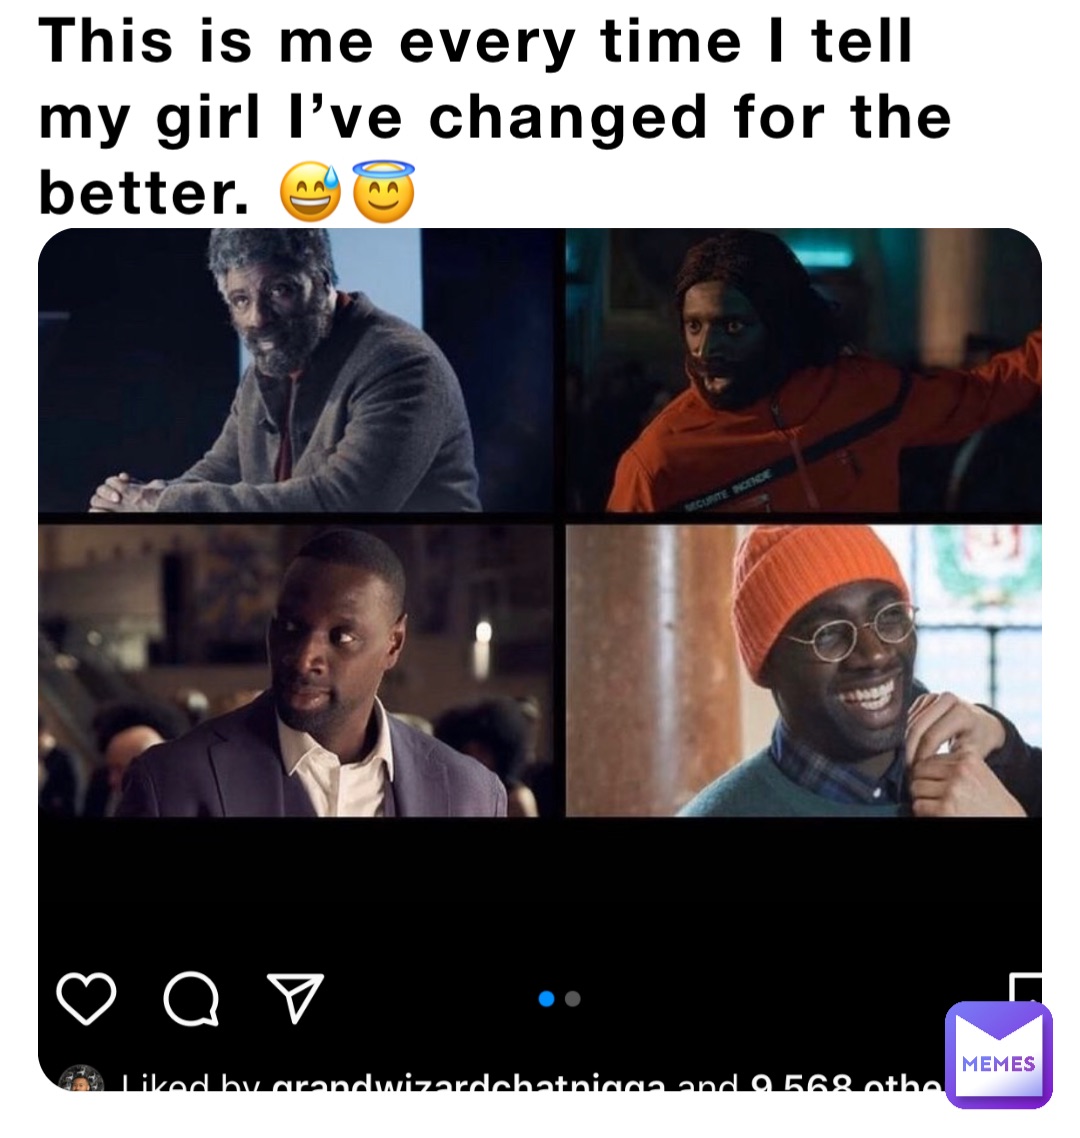 This is me every time I tell my girl I’ve changed for the better. 😅😇